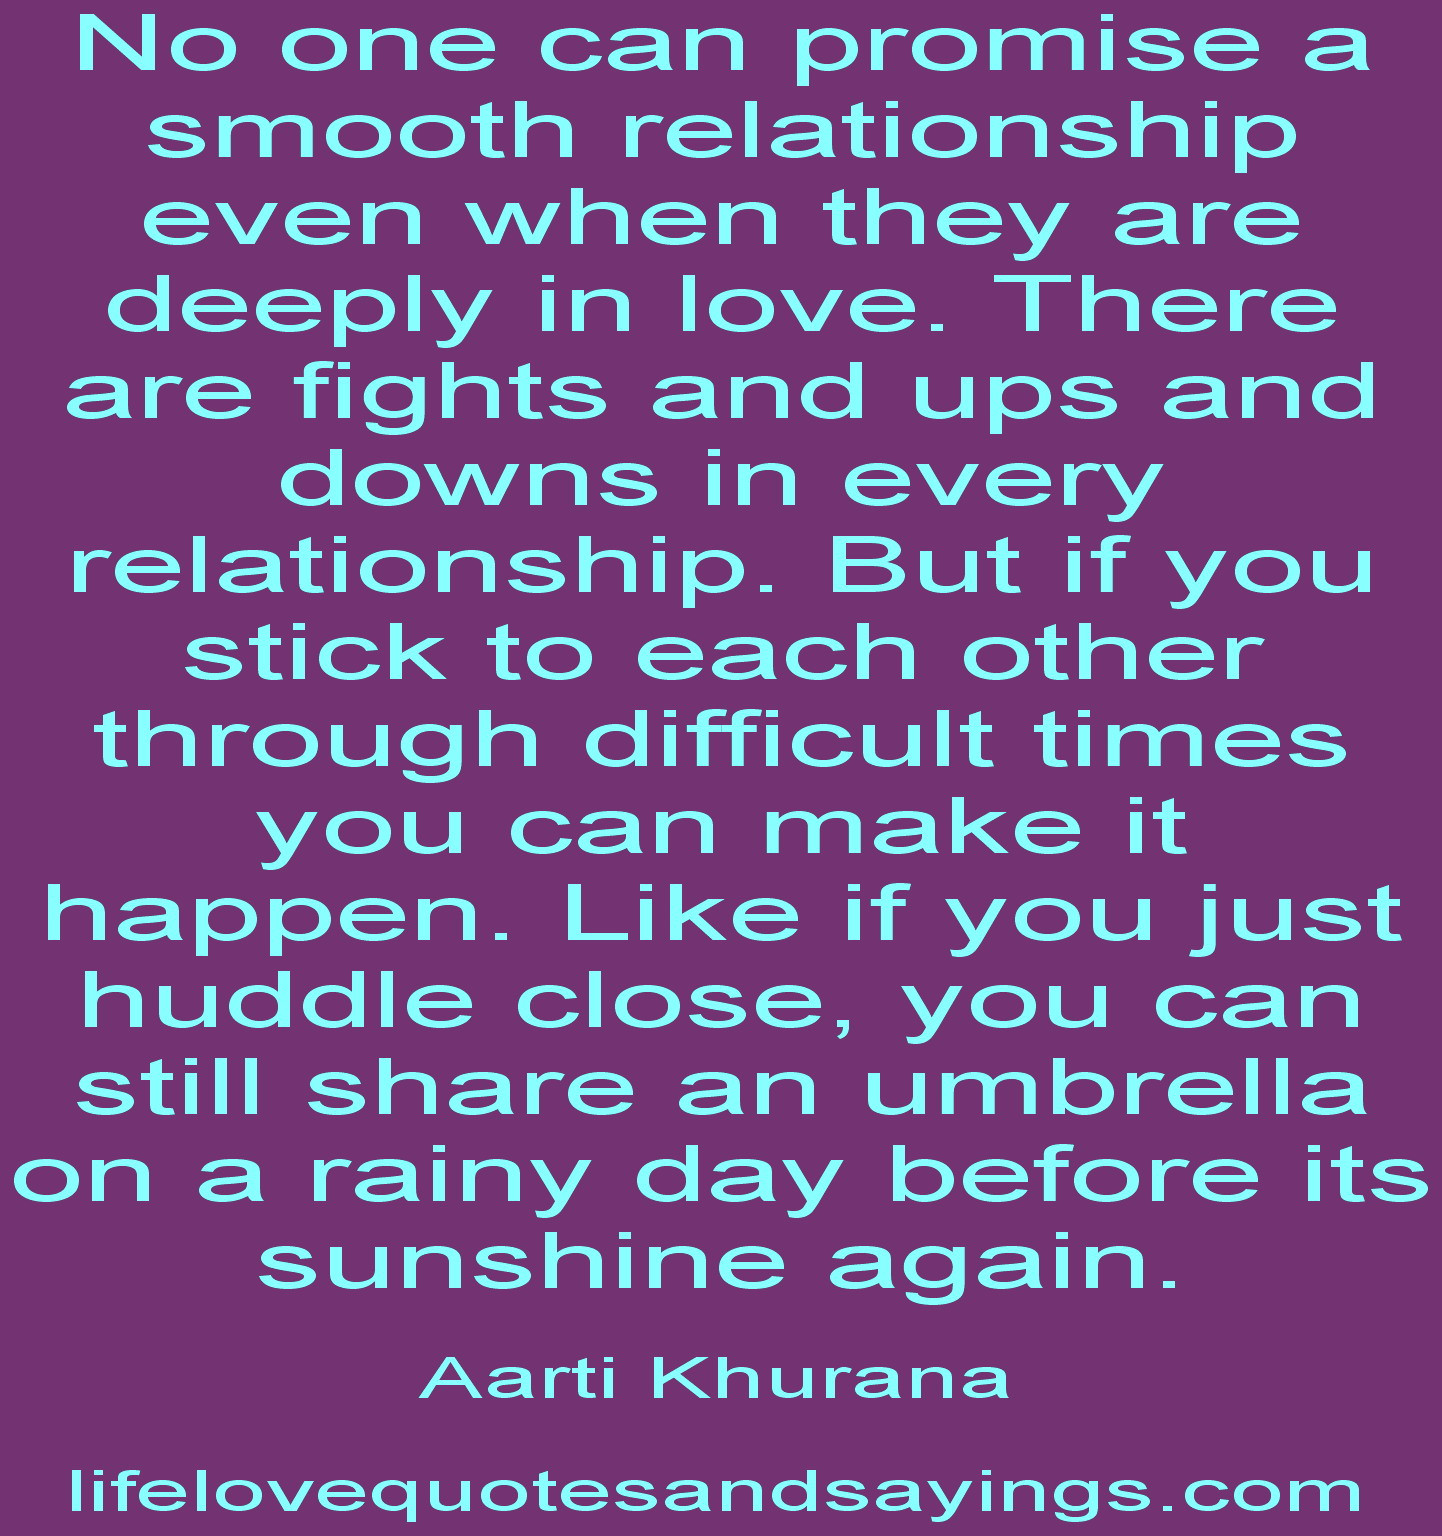 Ups And Downs Relationship Quotes
 Famous quotes about Ups And Downs Quotation